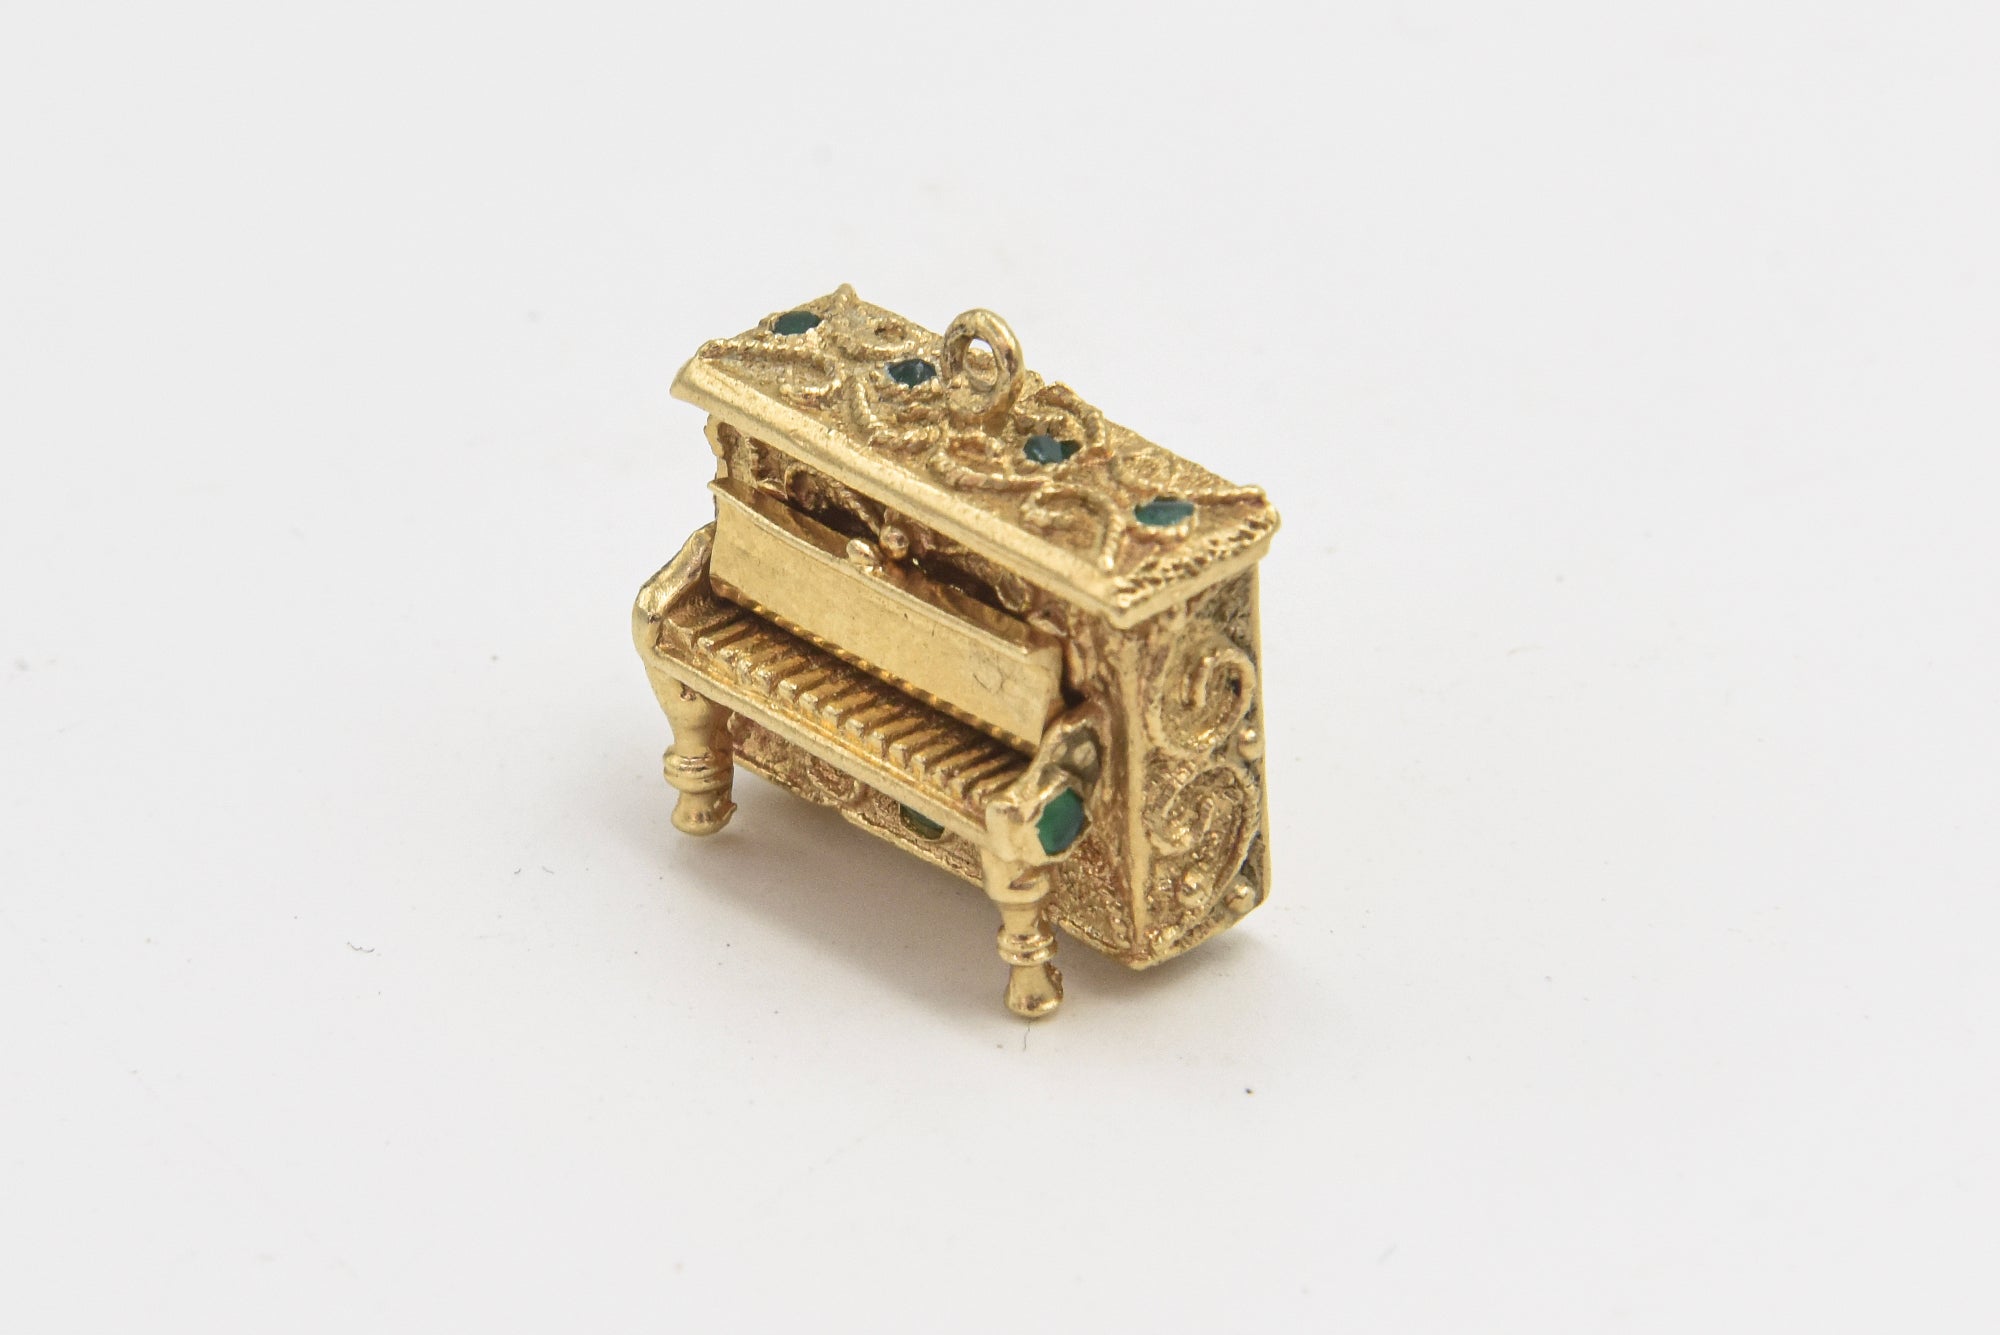 14k Yellow gold figural gold piano charm that features a hinged cover that reveals articulated piano keys, bezel-set chrysoprase cabochons, and applied rope and granulation details throughout.  It has a bail to the top that allows it to be worn as a